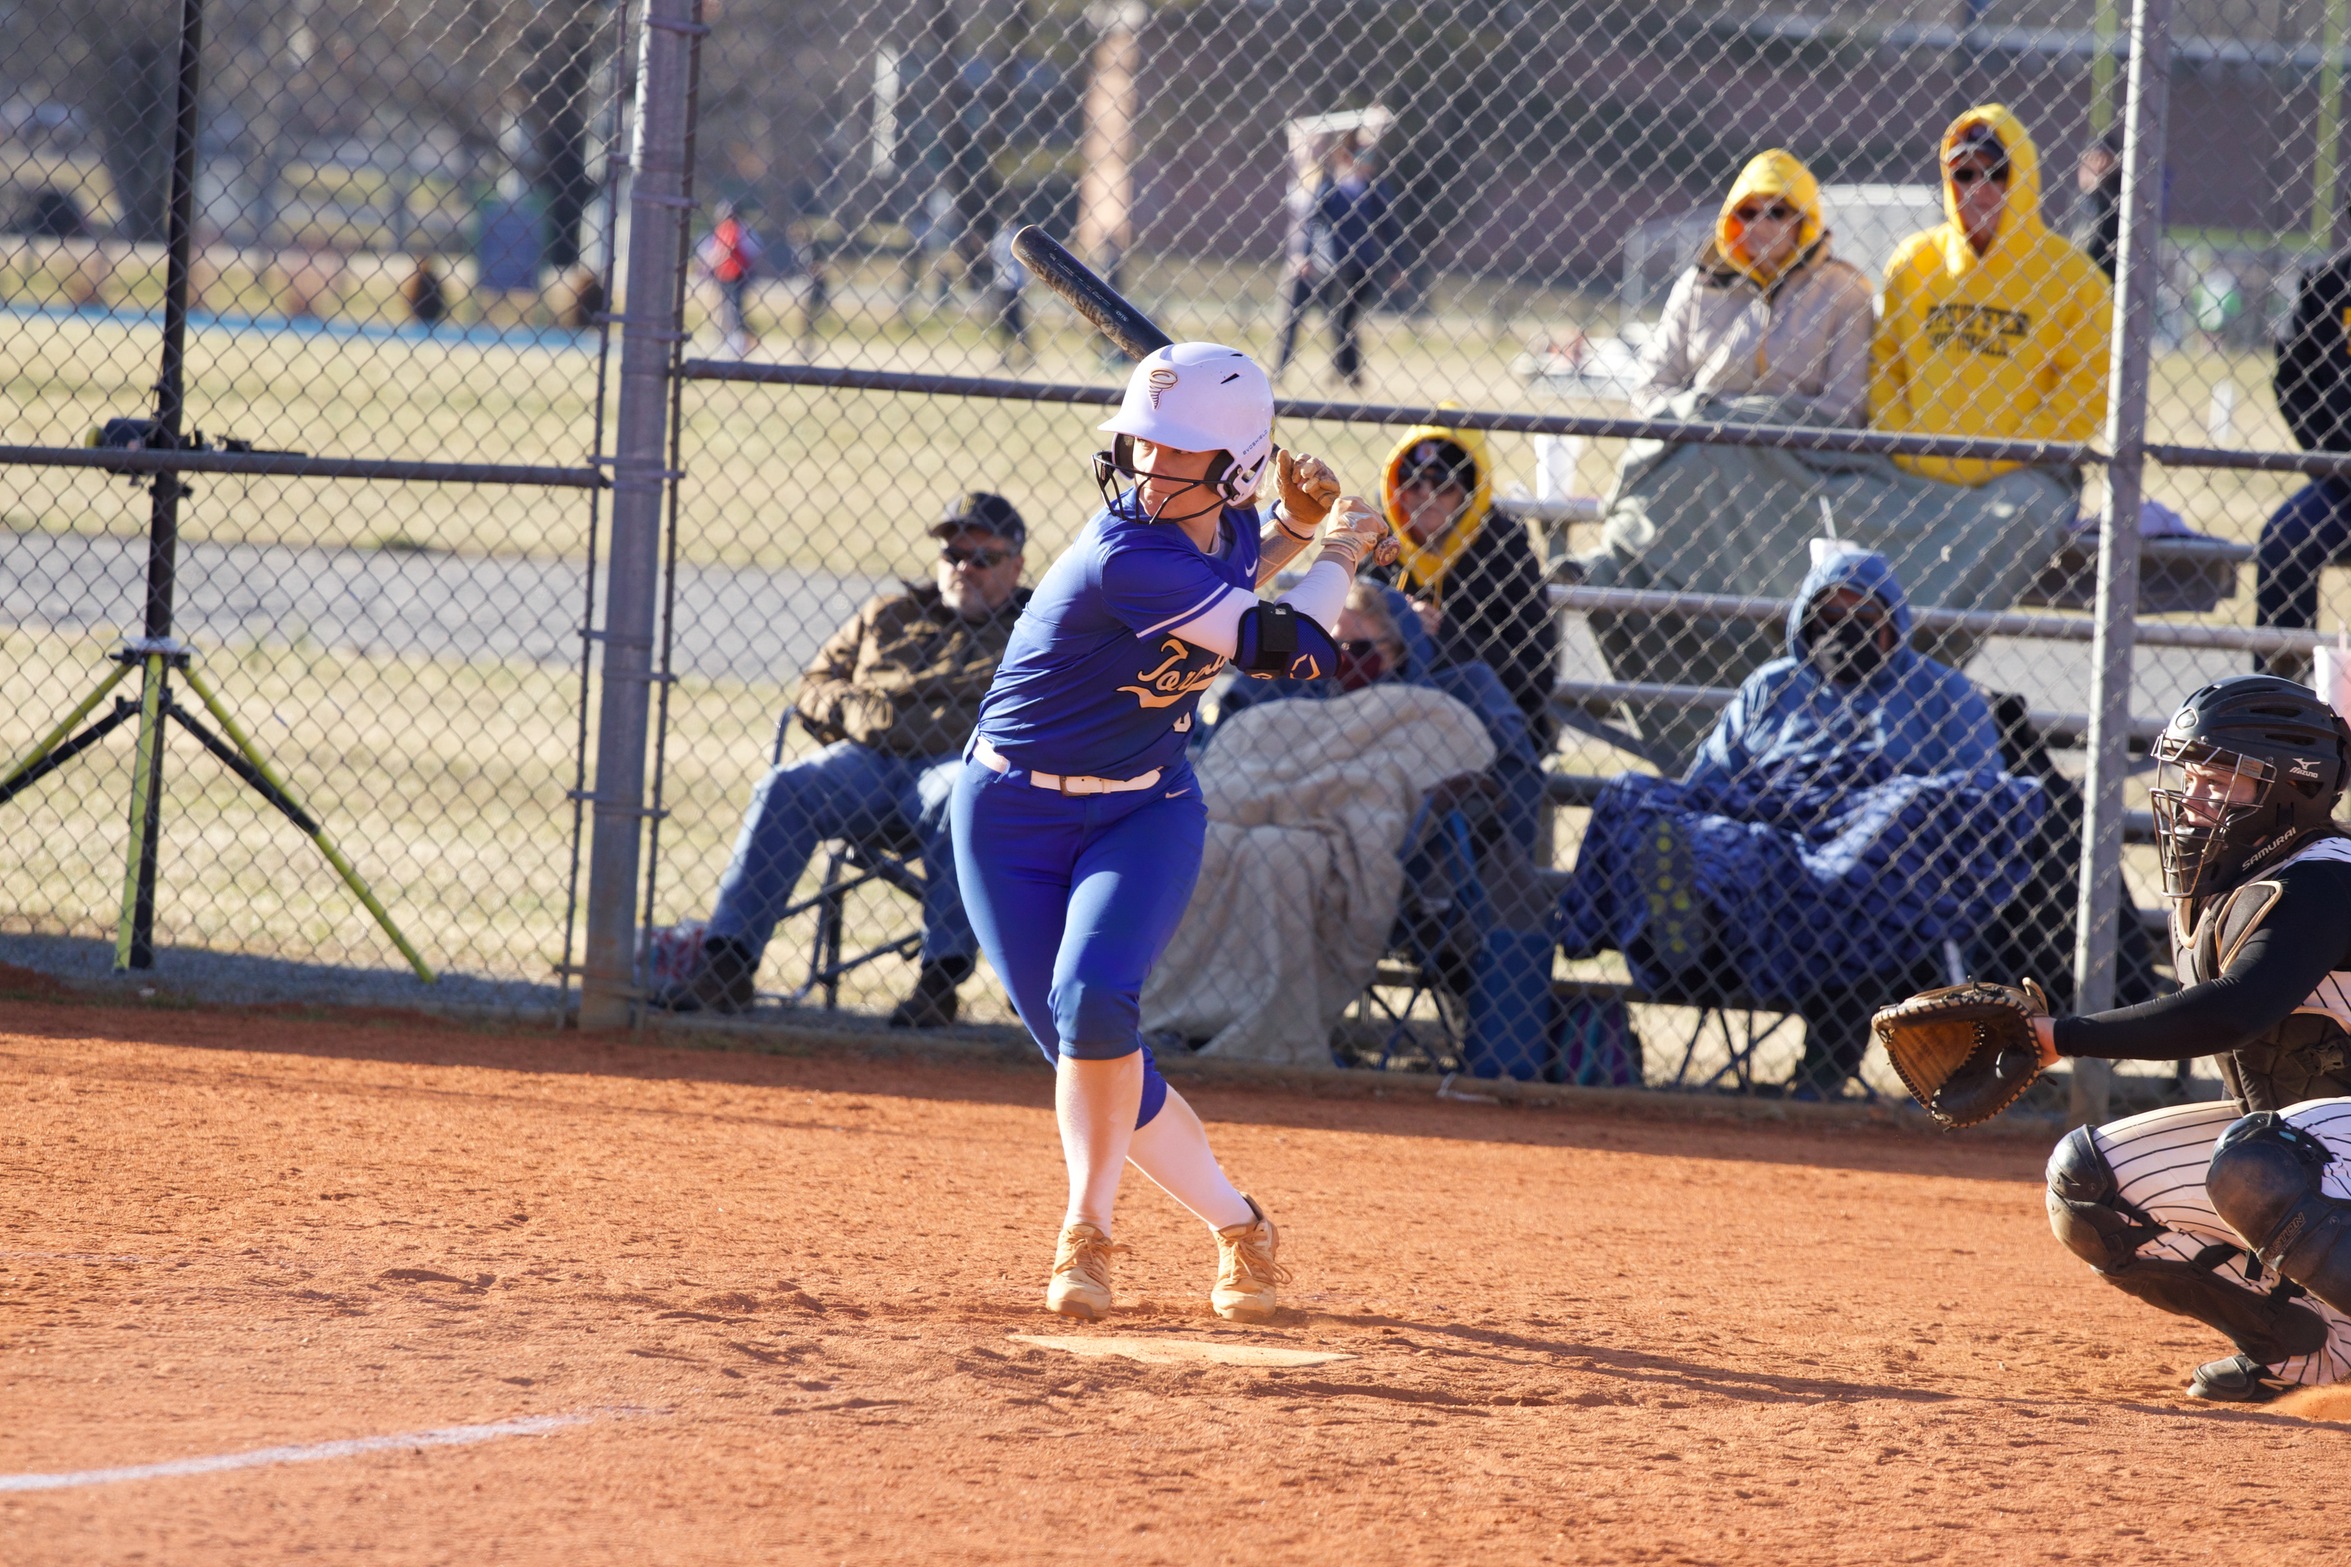 Tornados Drop Two to Eagles in Non-Conference Action